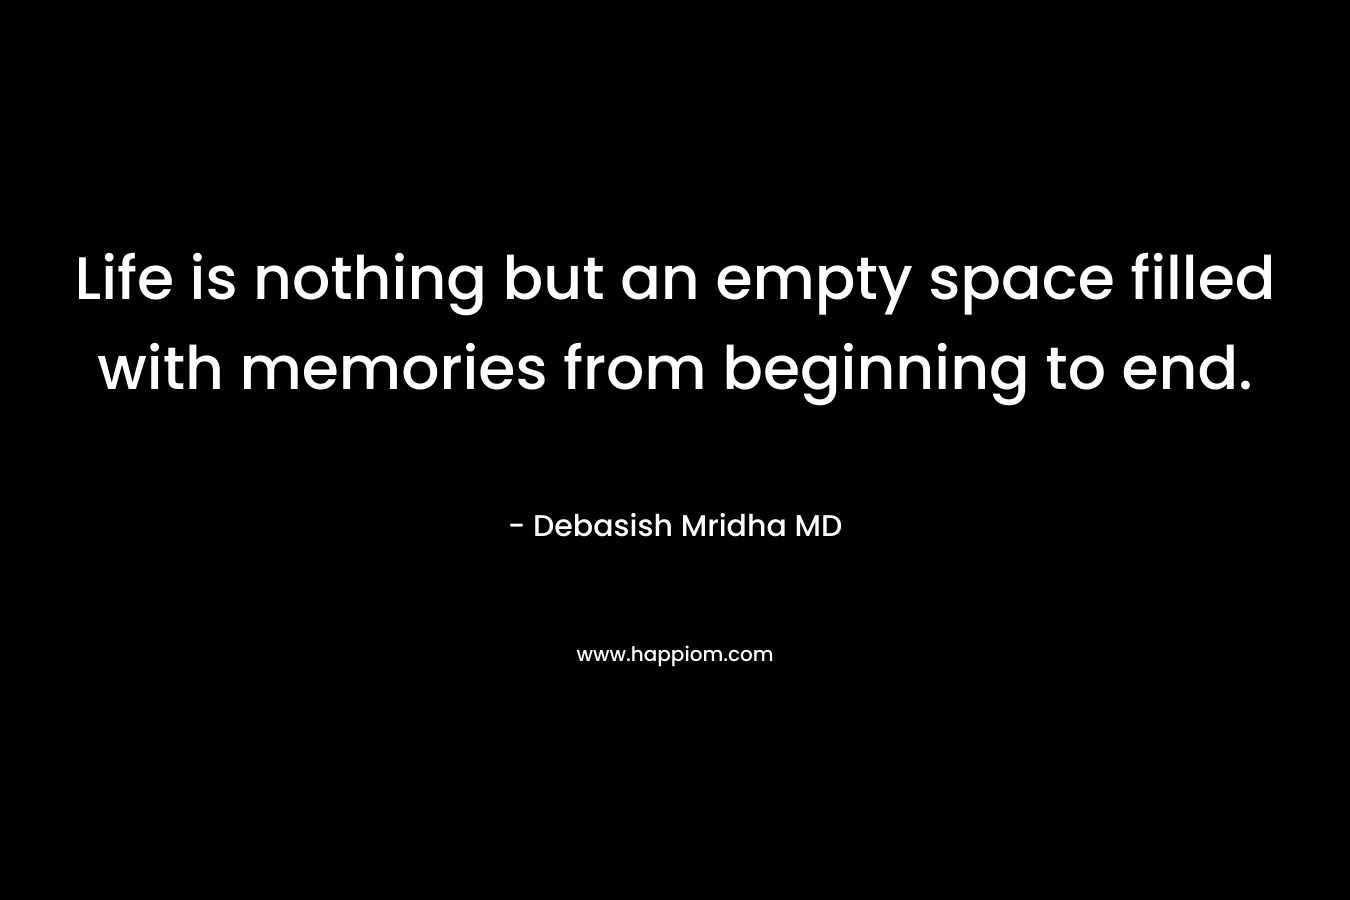 Life is nothing but an empty space filled with memories from beginning to end.